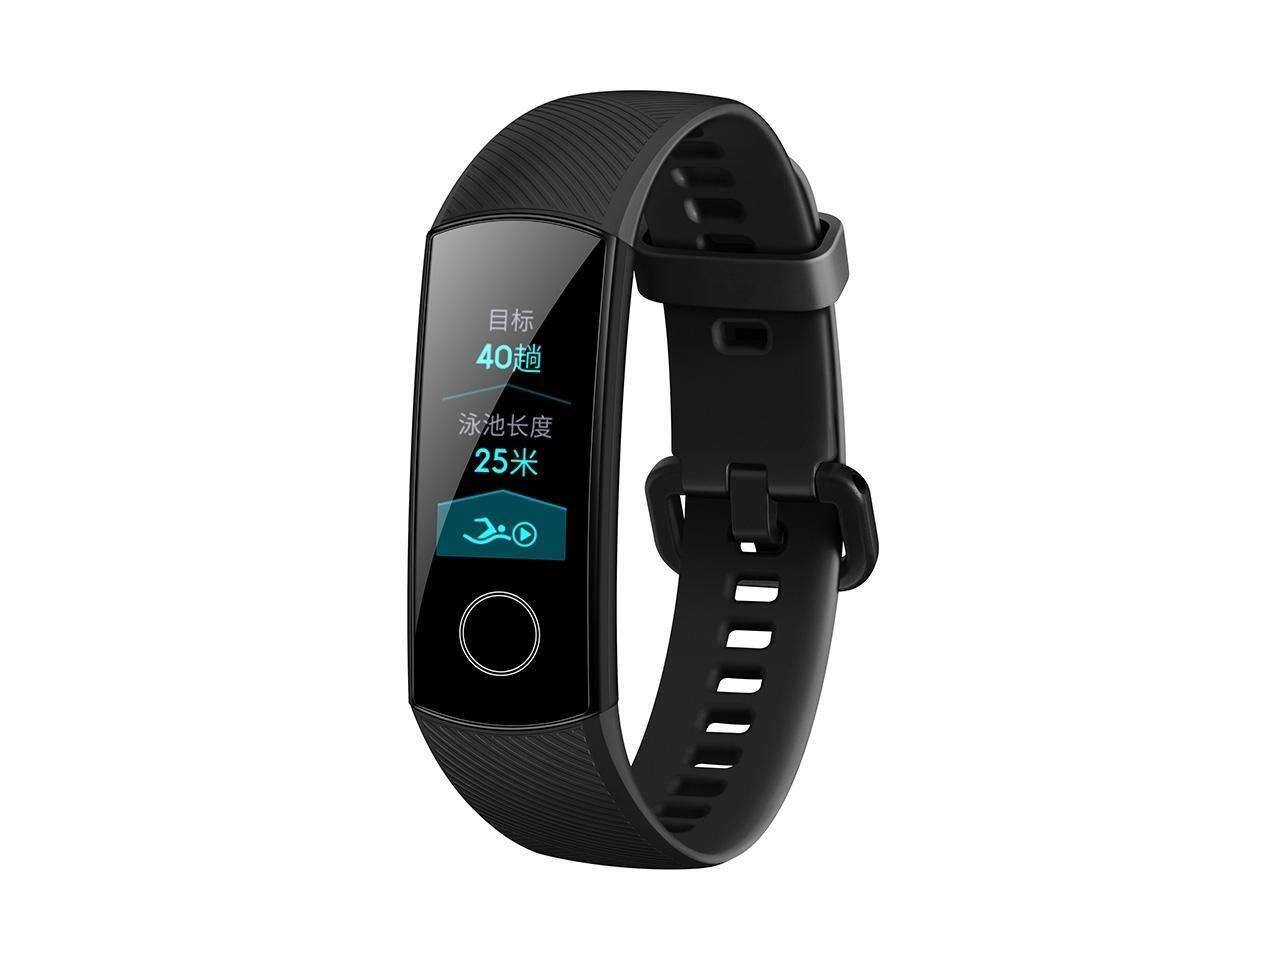 Huawei Honor Band 4 Standard Version Smart Bracelet With 0.95 inch OLED Color Screen, 5ATM Waterproof, Support Heart Rate Monitor / Sleep Monitor / Message Reminder